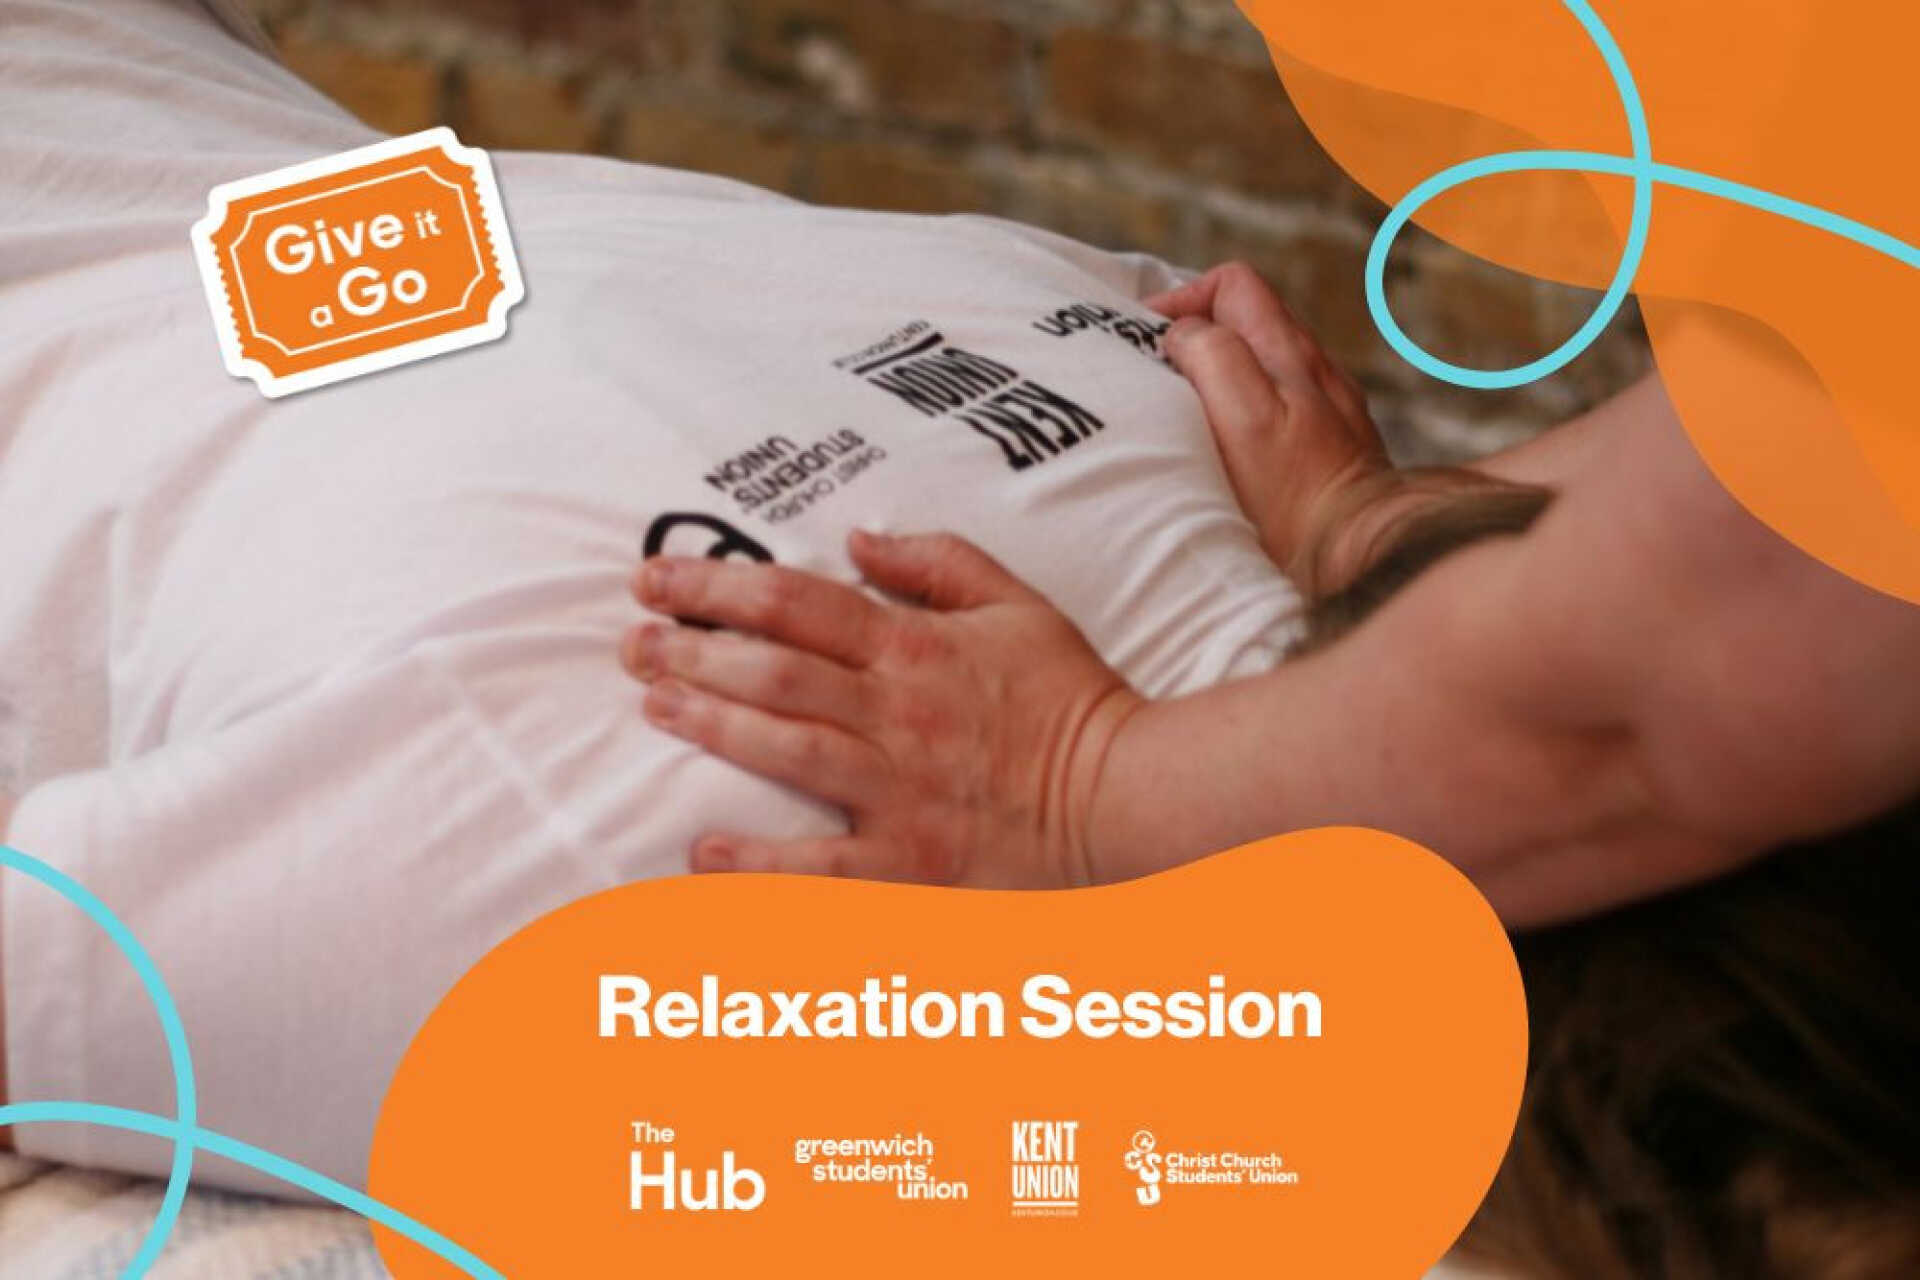 Give it a go, relaxation session